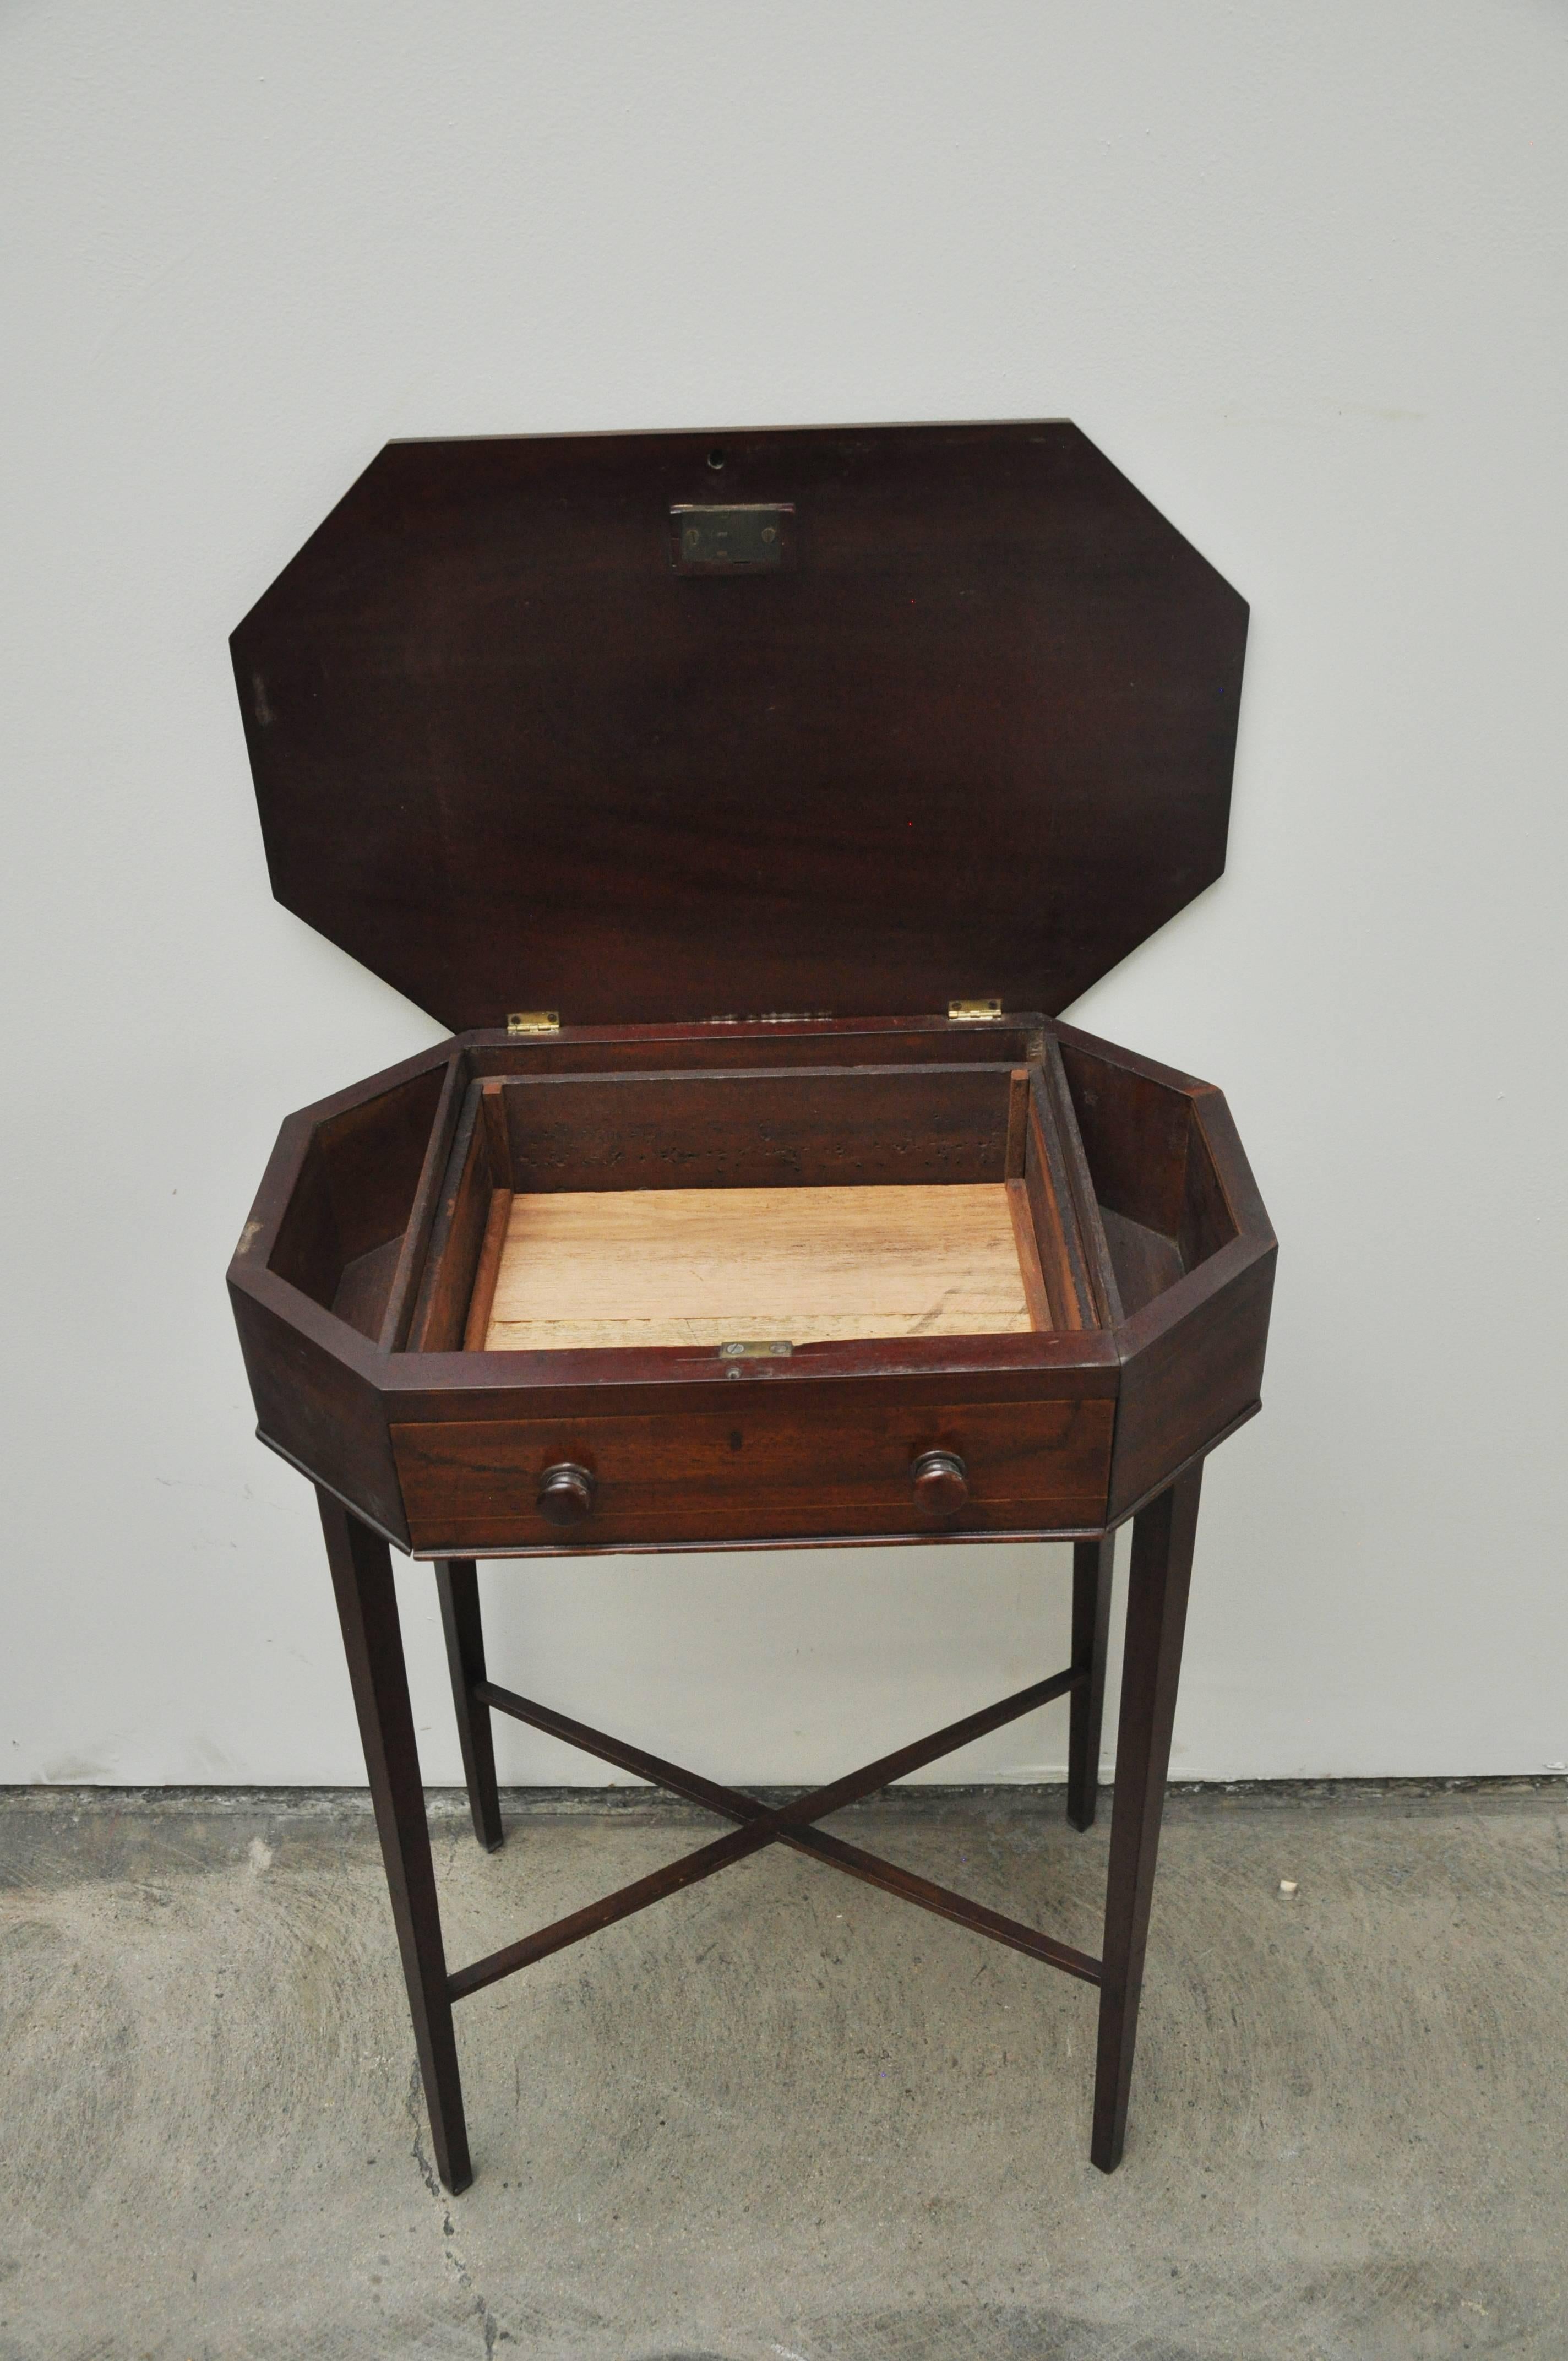 Sewing table, circa 1880s.